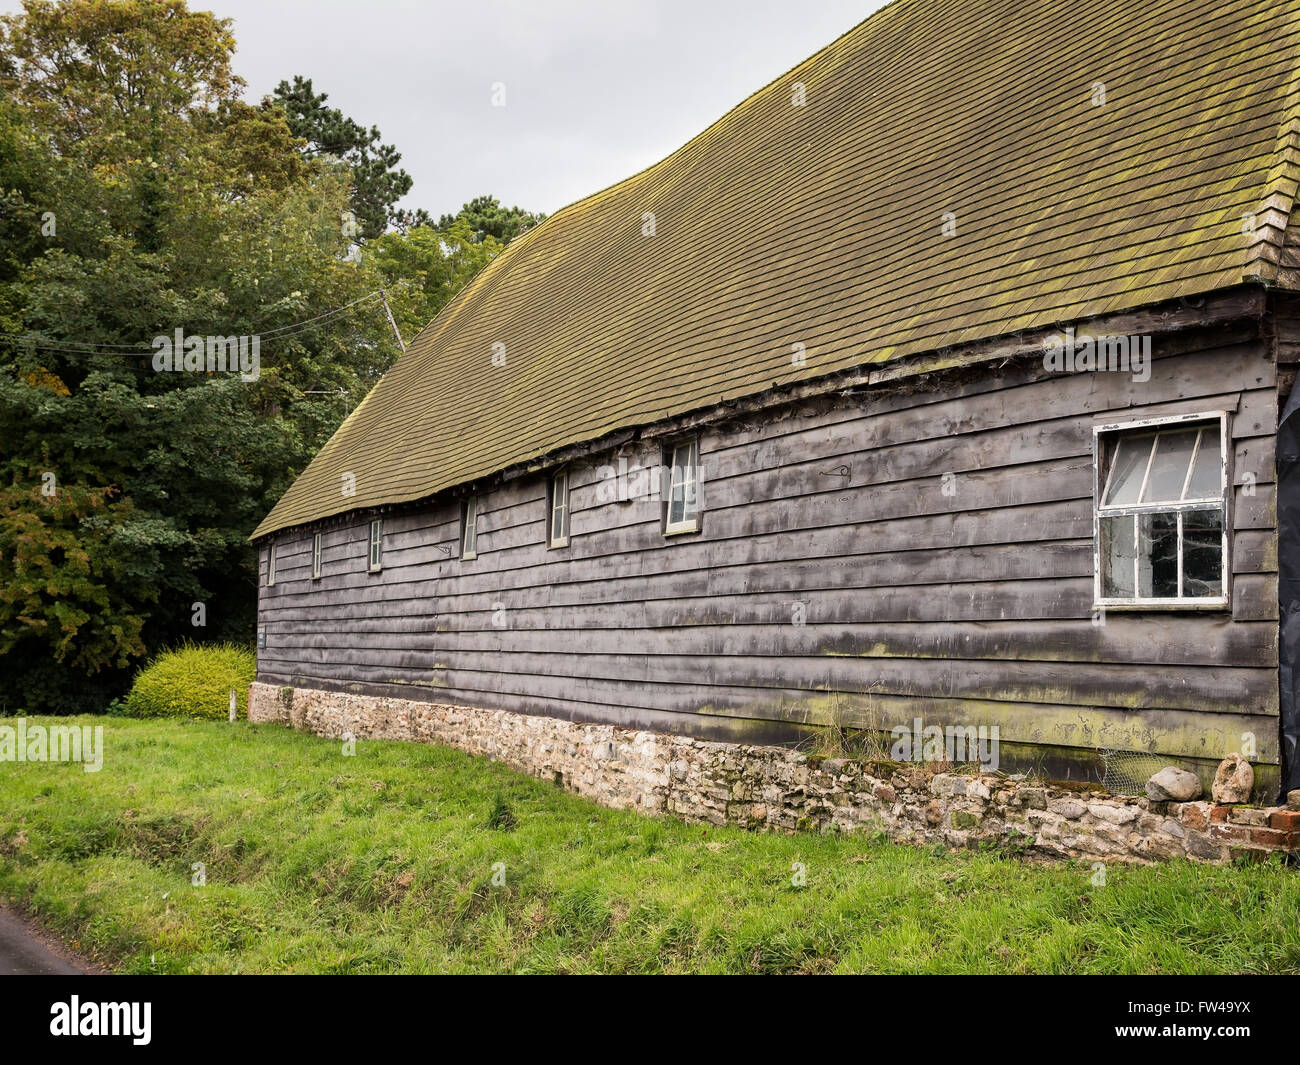 A large traditional wooden barn in an English village. Stock Photo